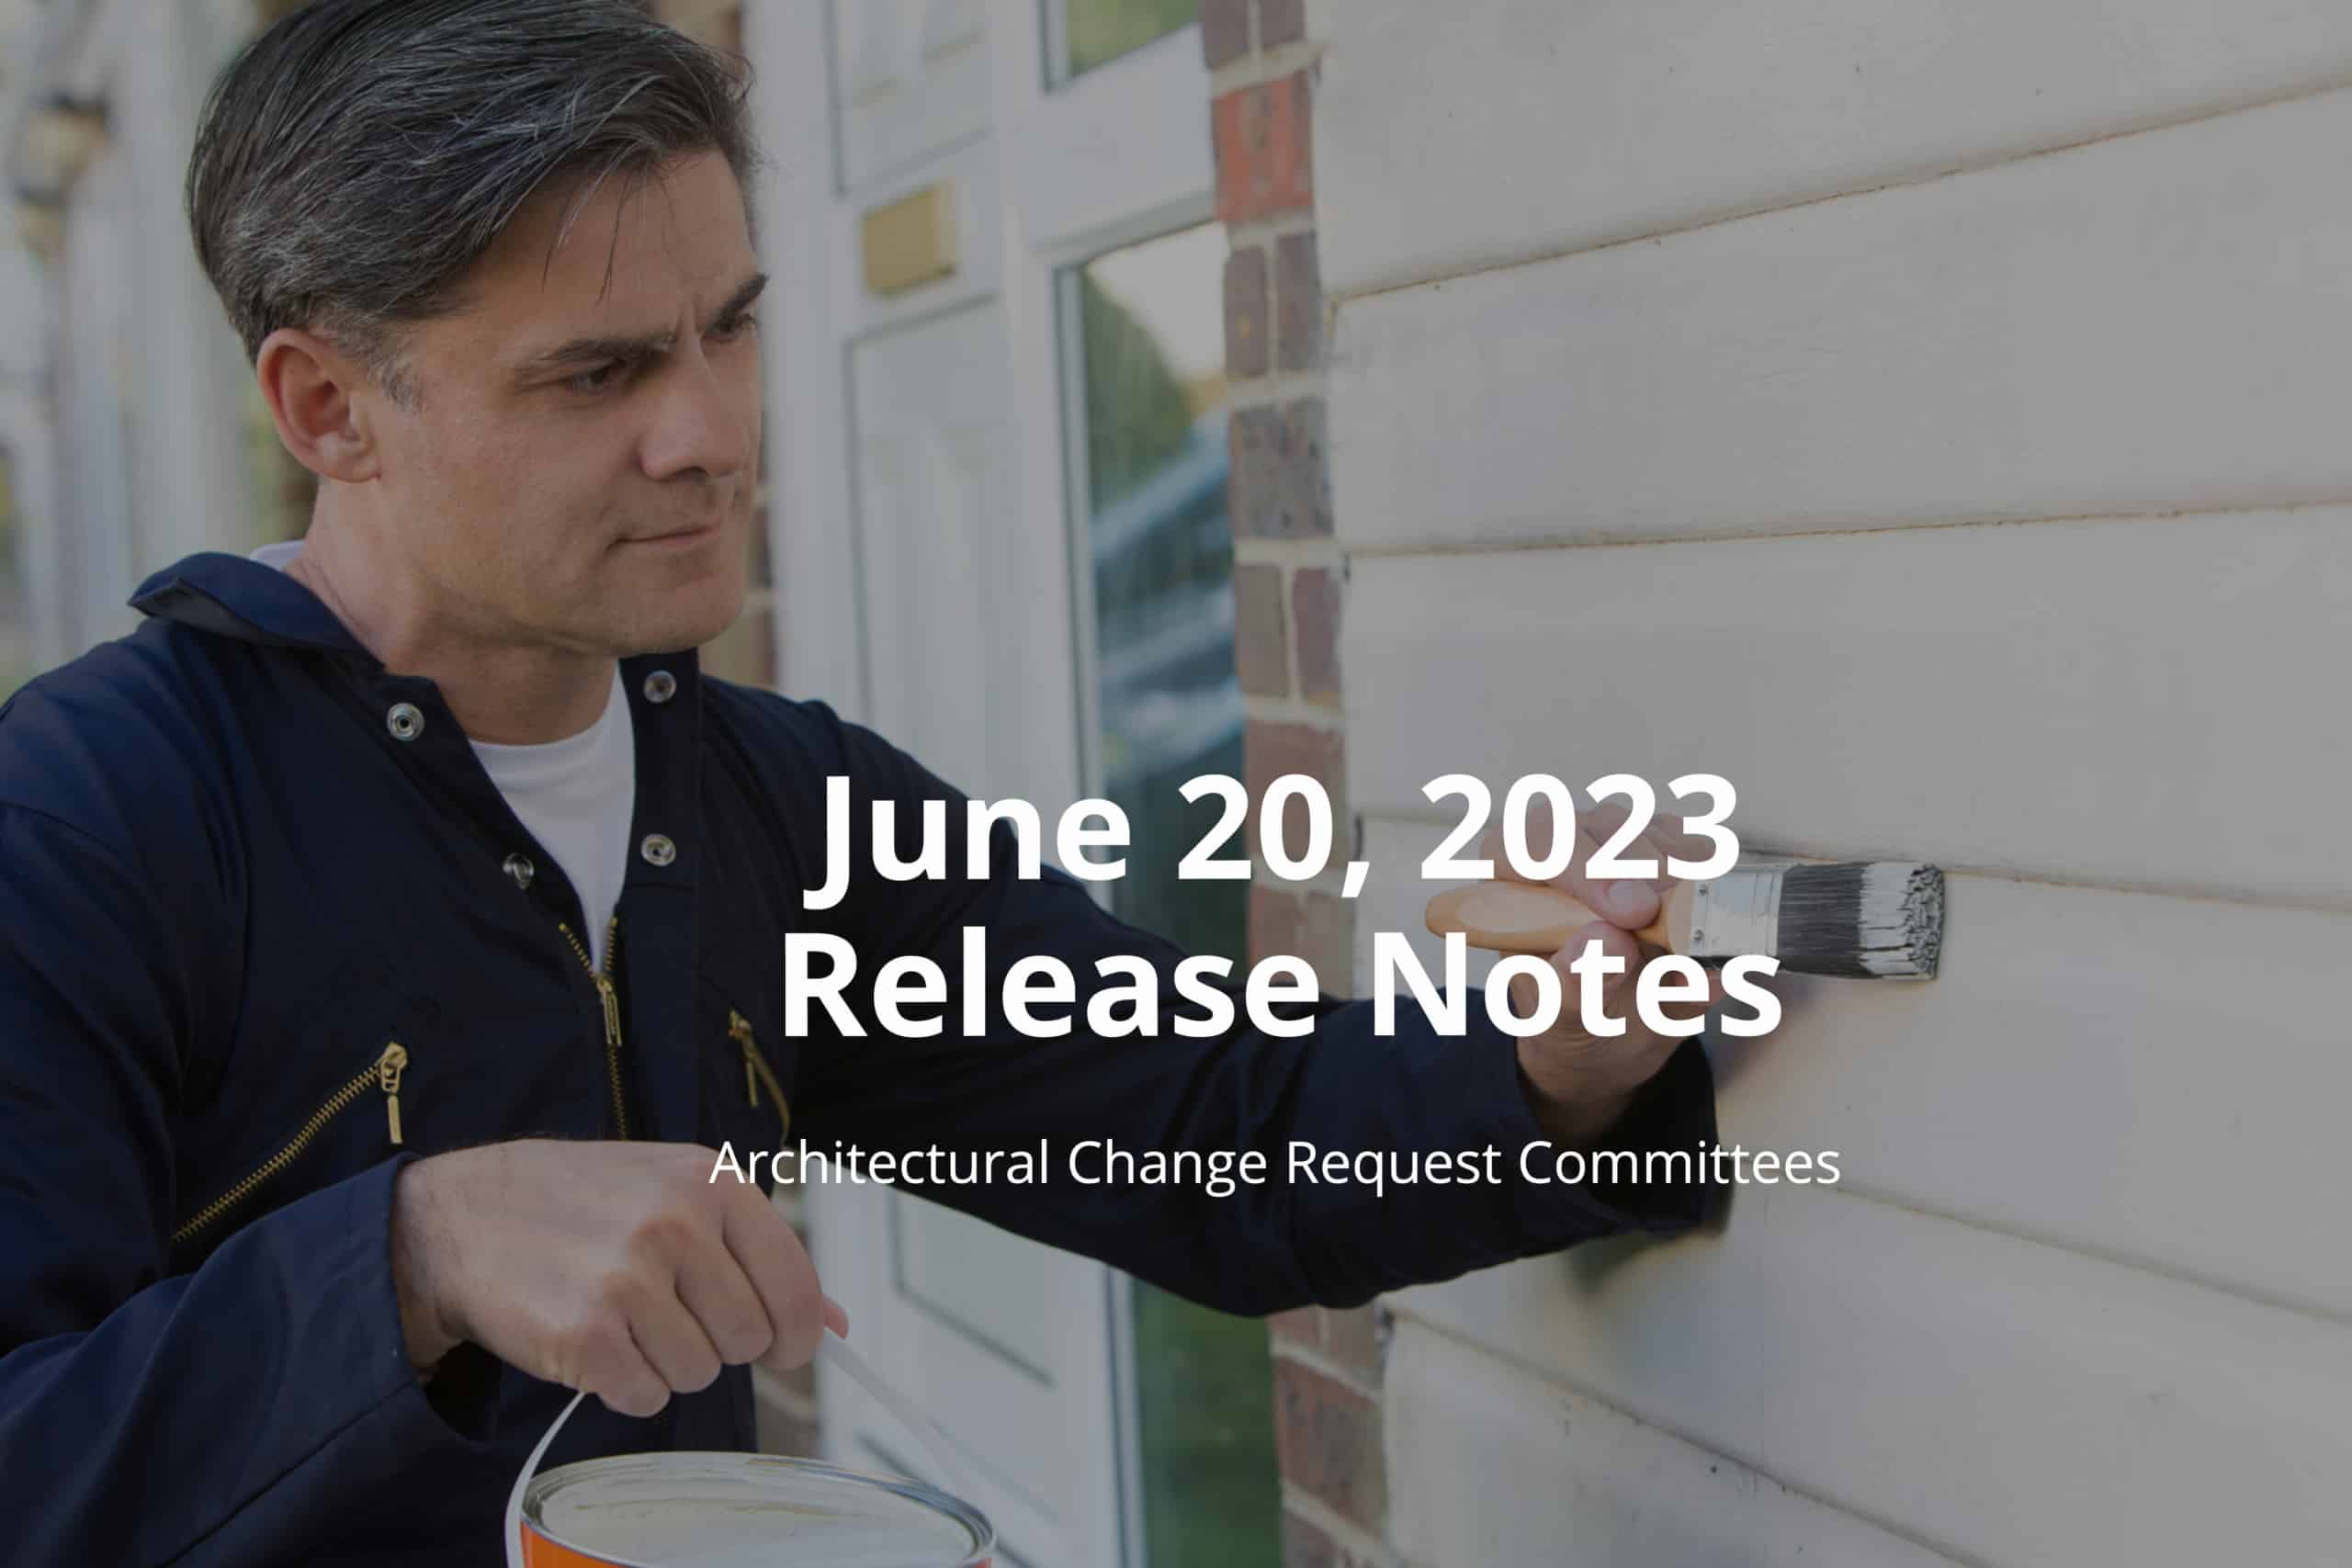 Architectural Change Request Committee